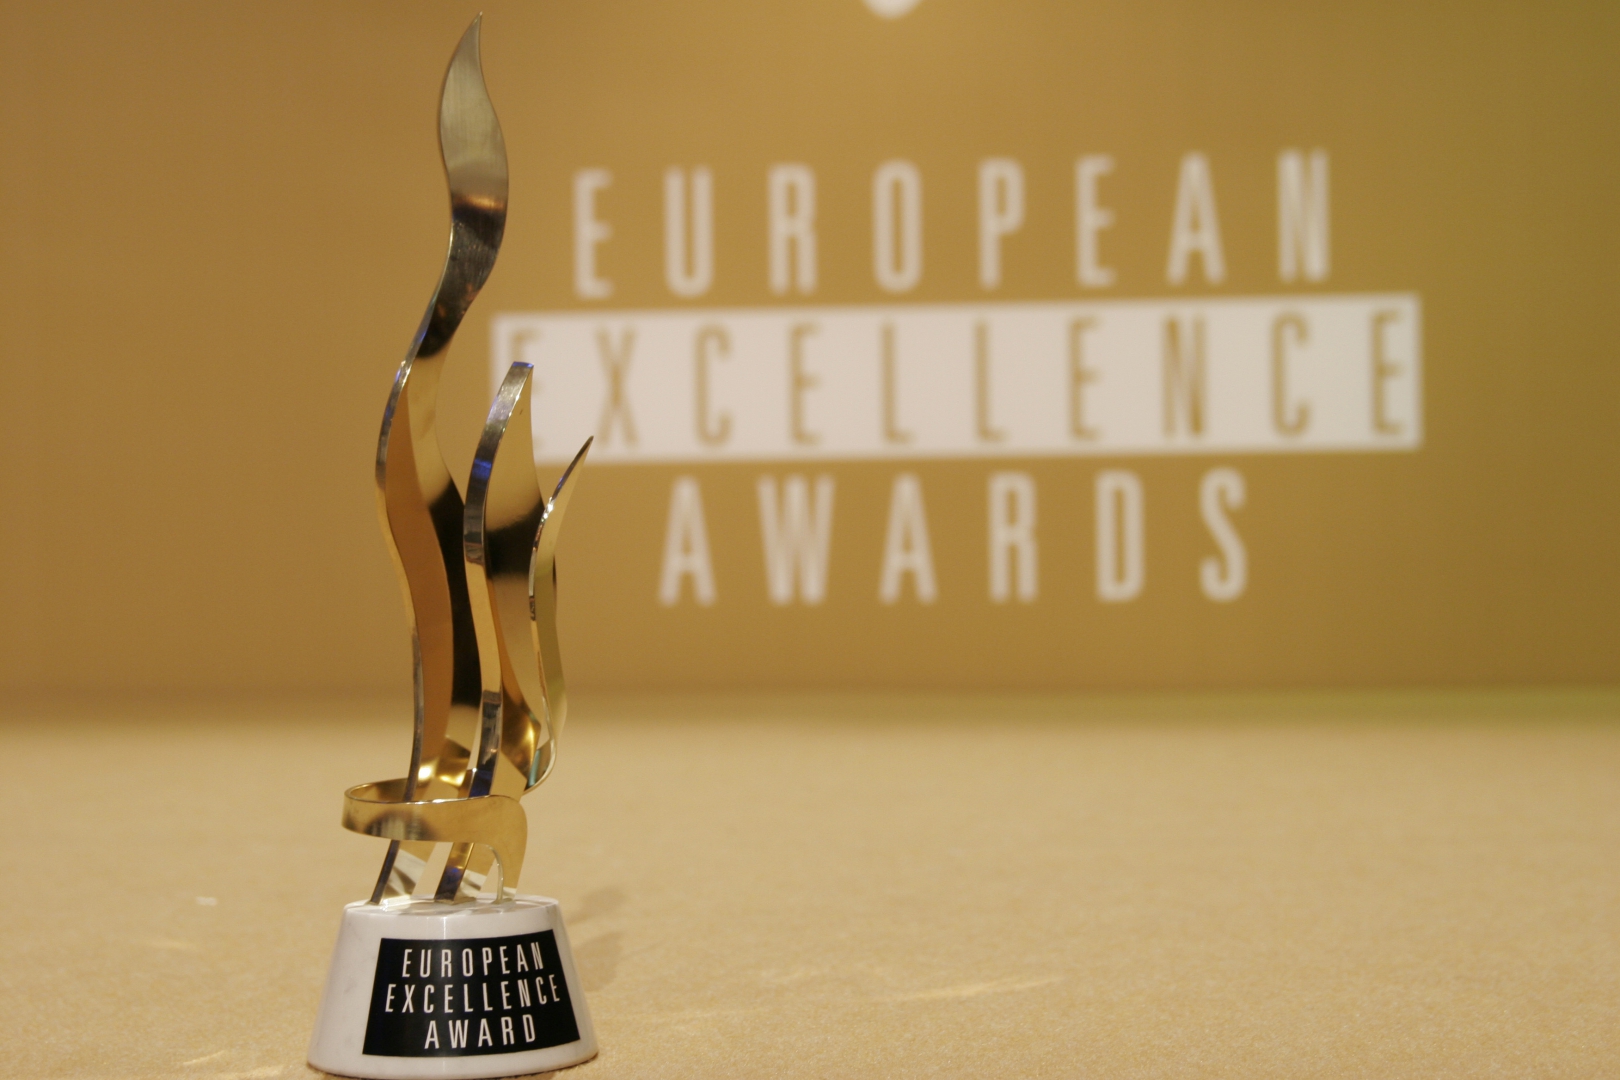 CHAPTER 4 AND CHIPSY SHORTLISTED FOR THE EUROPEAN EXCELLENCE AWARD